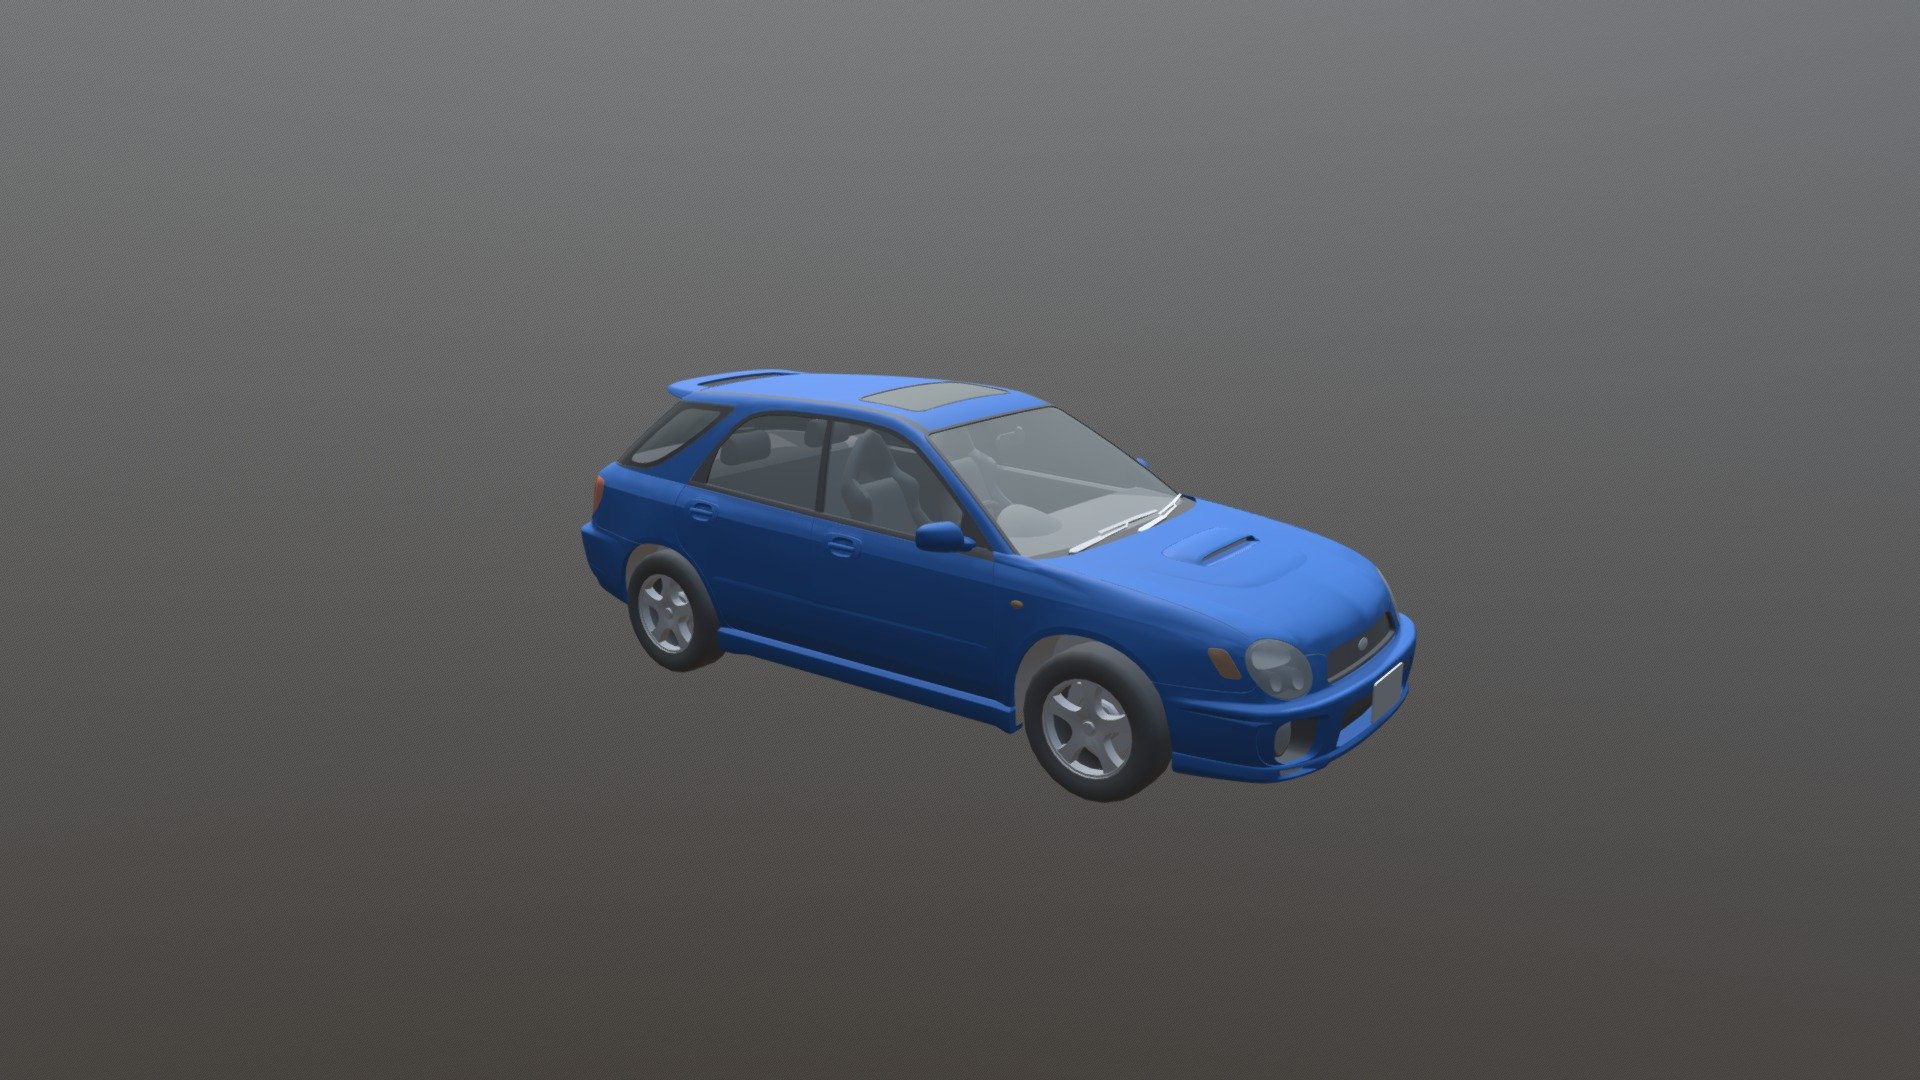 This 3D model was created with program 3D Max.
Subaru cars are known for their use of a boxer engine layout in most vehicles above 1500 cc. Most Subaru models have used the Symmetrical All Wheel Drive drive-train layout since 1972. The flat/boxer engine and all-wheel-drive became standard equipment for mid-size and smaller cars in most international markets by 1996, and is now standard in most North American market Subaru vehicles. The lone exception is the BRZ, introduced in 2012, which uses the boxer engine but instead uses a rear-wheel-drive structure. Subaru also offers turbocharged versions of their passenger cars, such as the Impreza WRX and the Legacy 2.5GT. The 2.0XT trim of the Forester also includes a turbocharged engine, only is it not found in the BRZ, and most other non sport models 3d model